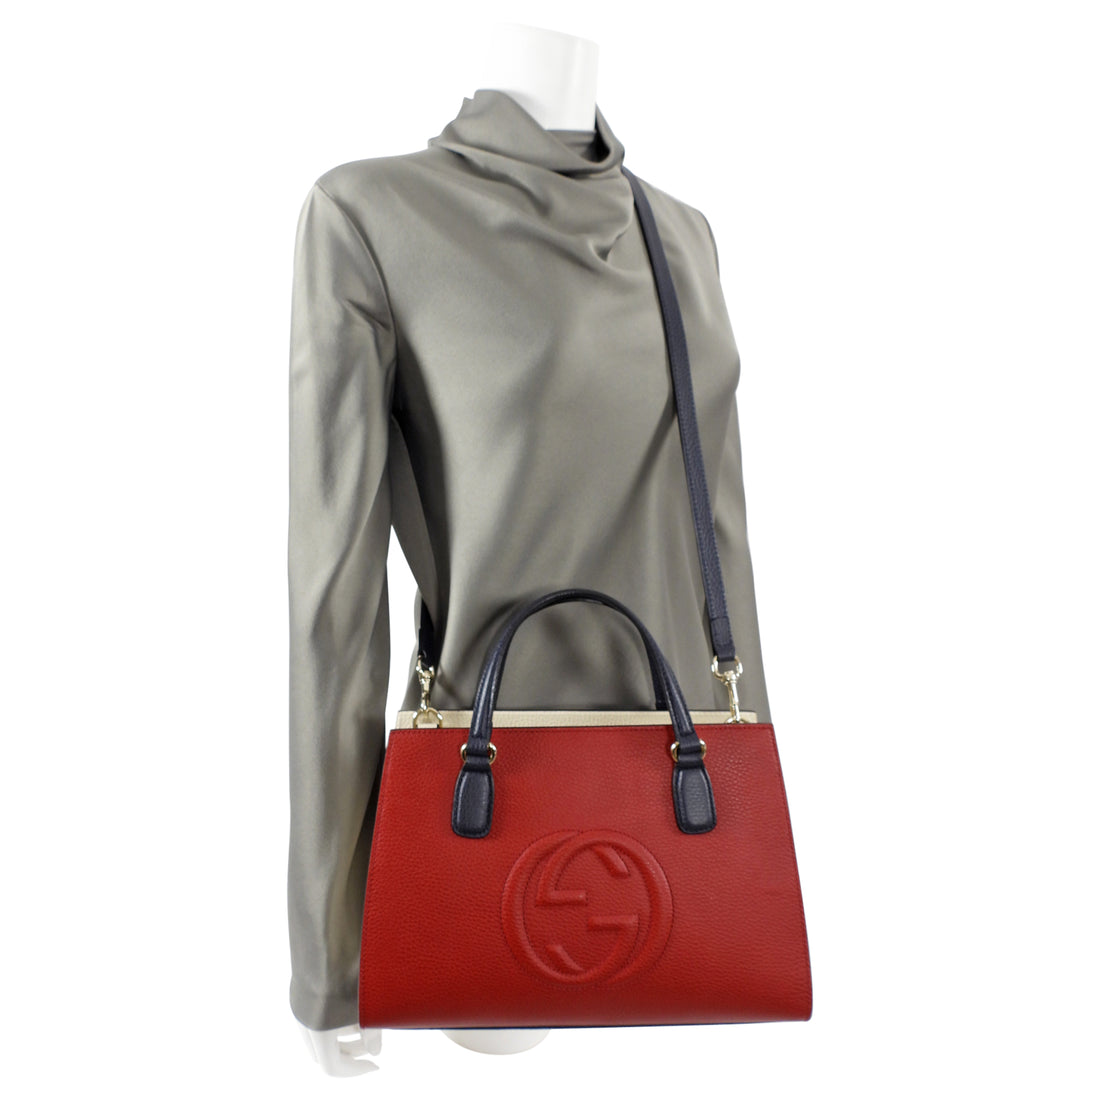 Gucci Soho Leather Top Handle Bag in Red Tricolor